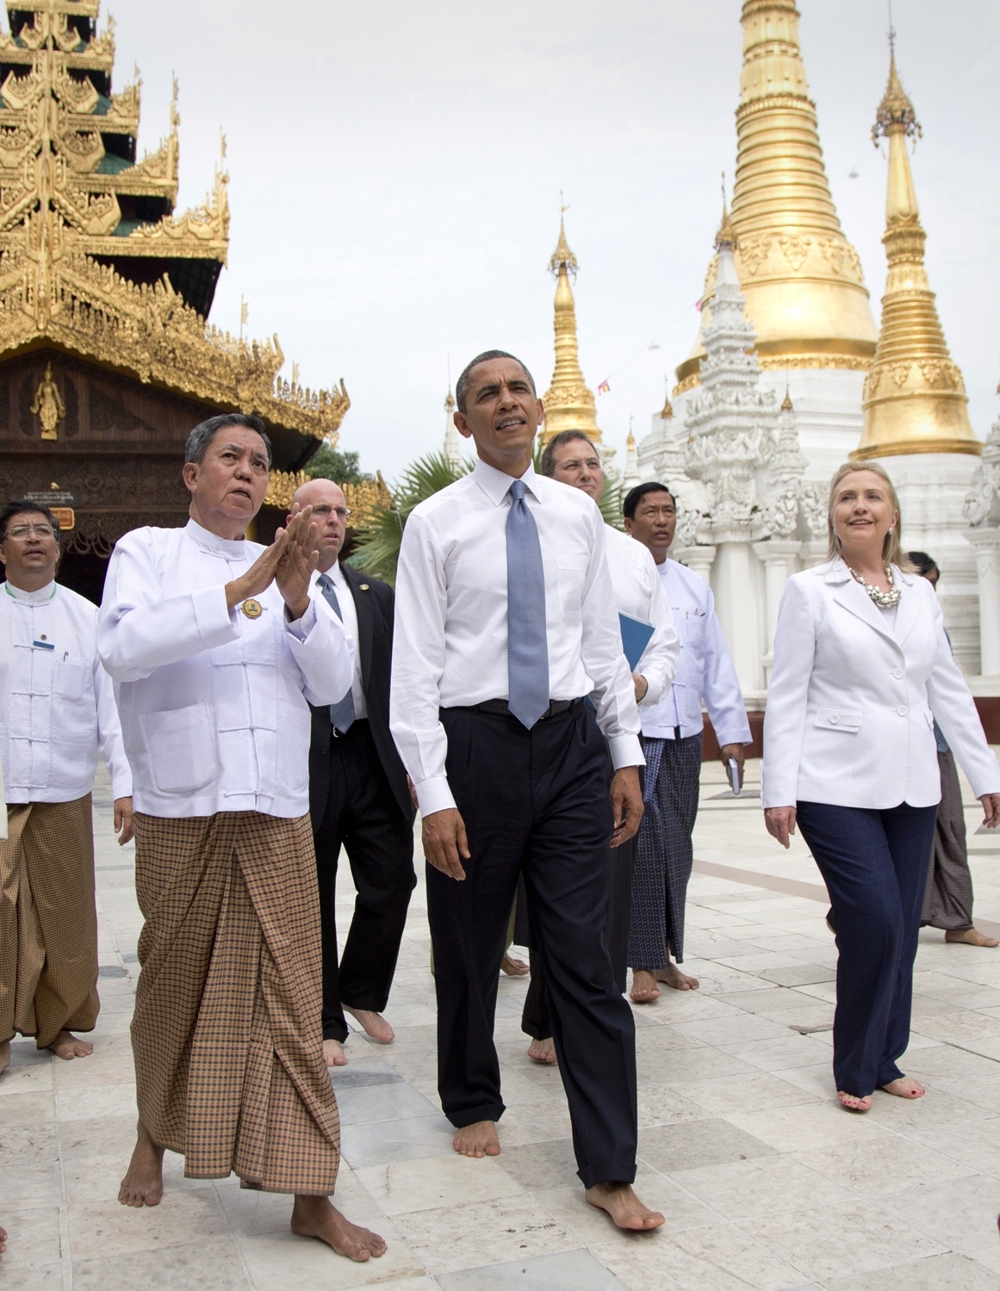 Obama Wins Popularity Contest in Myanmar this Monday